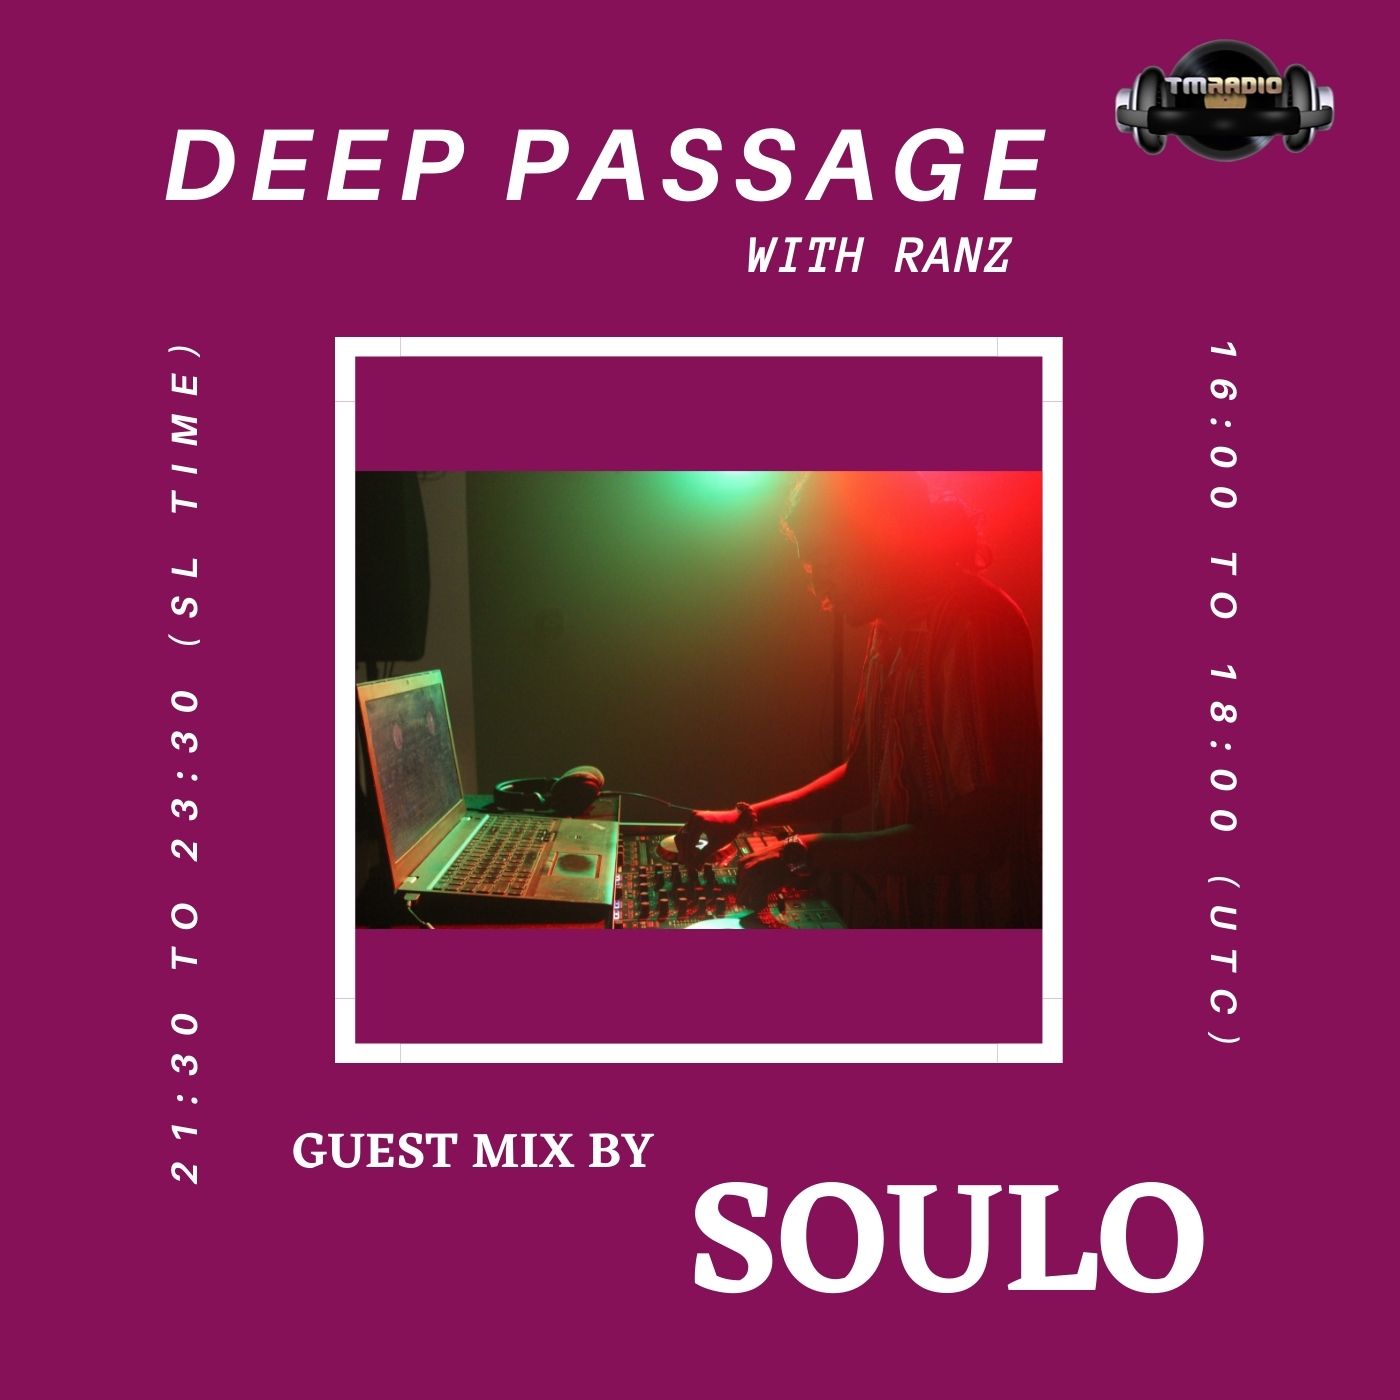 DEEP PASSAGE WITH RANZ | TM RADIO SHOW | EP 044 | Guest mix by SOULO (Sri Lanka) (from November 15th, 2021)